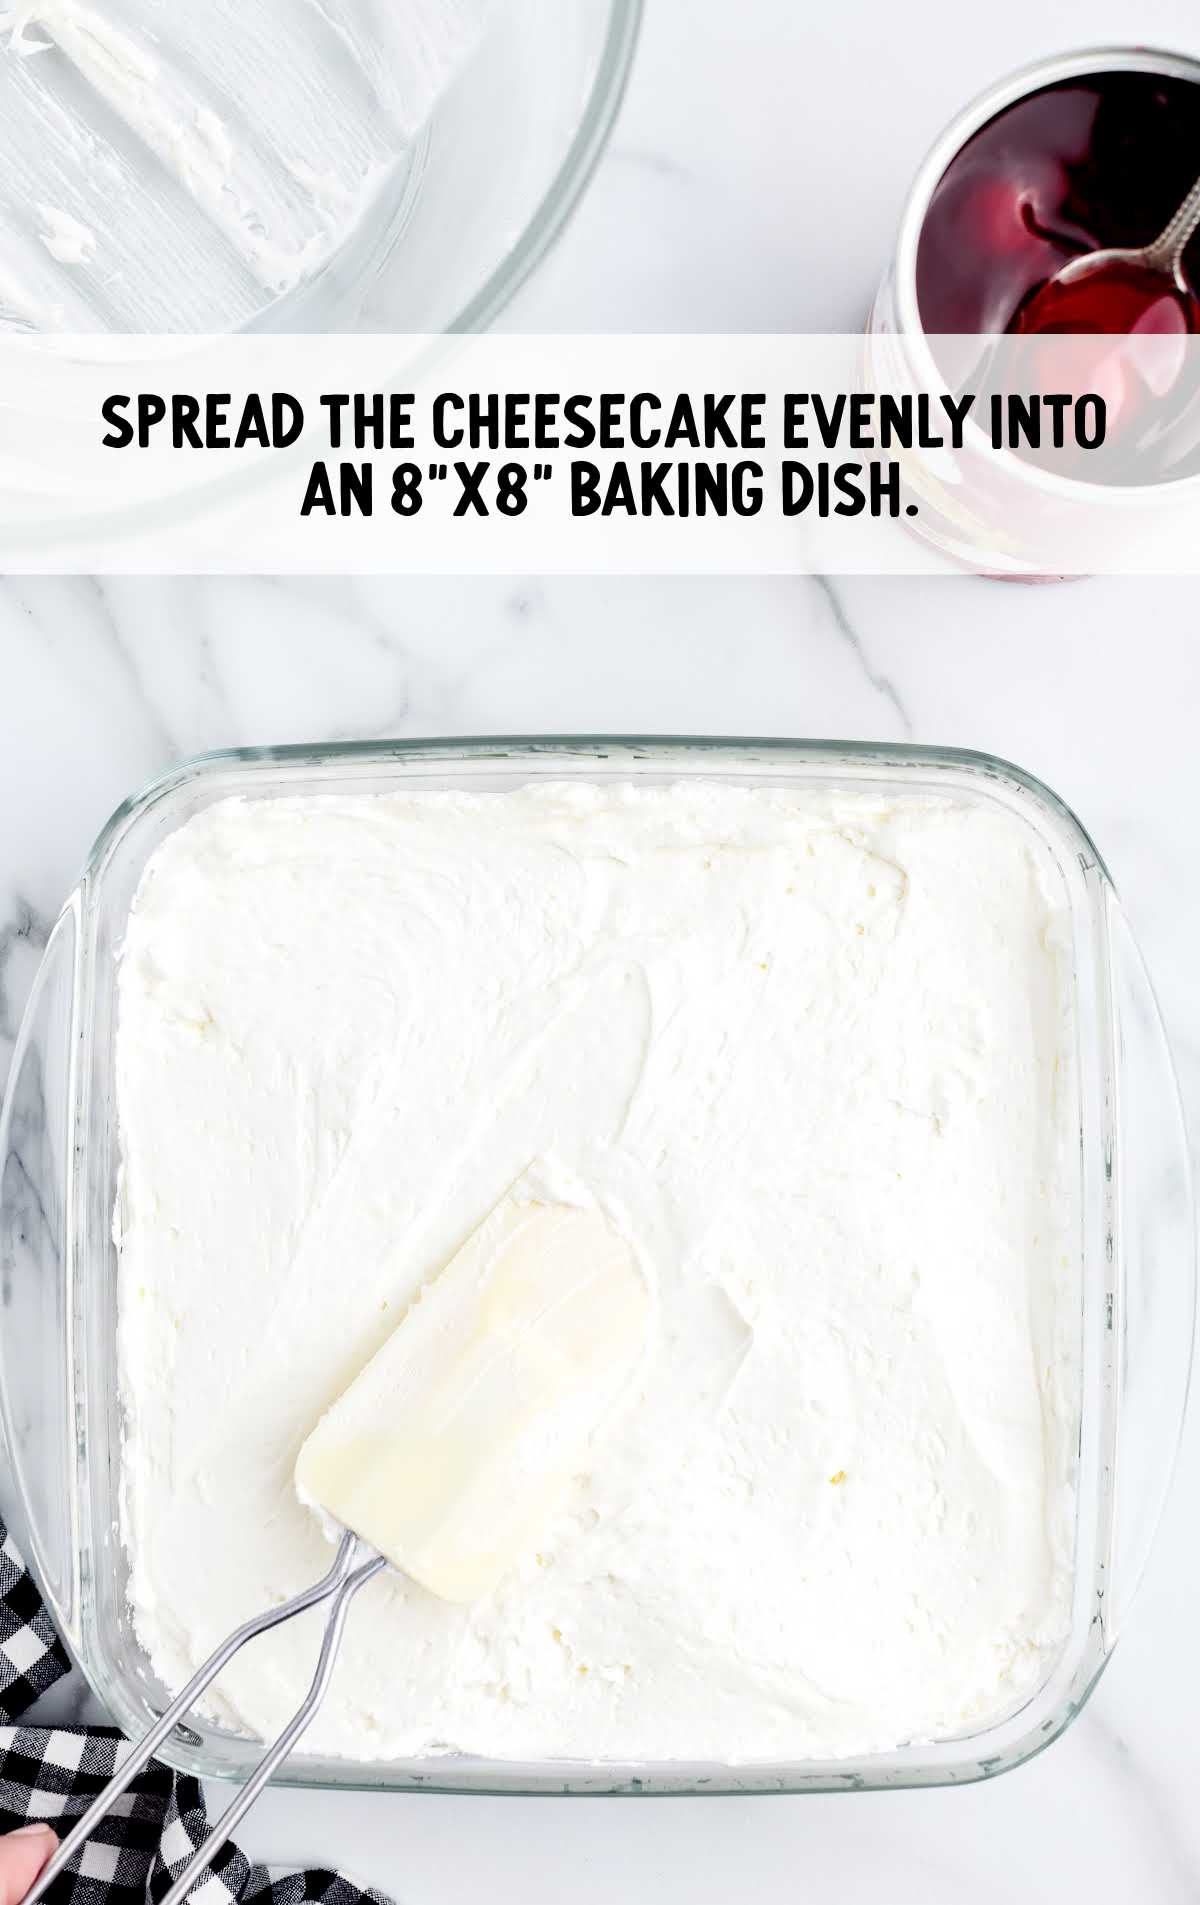 cheesecake spread into the baking dish